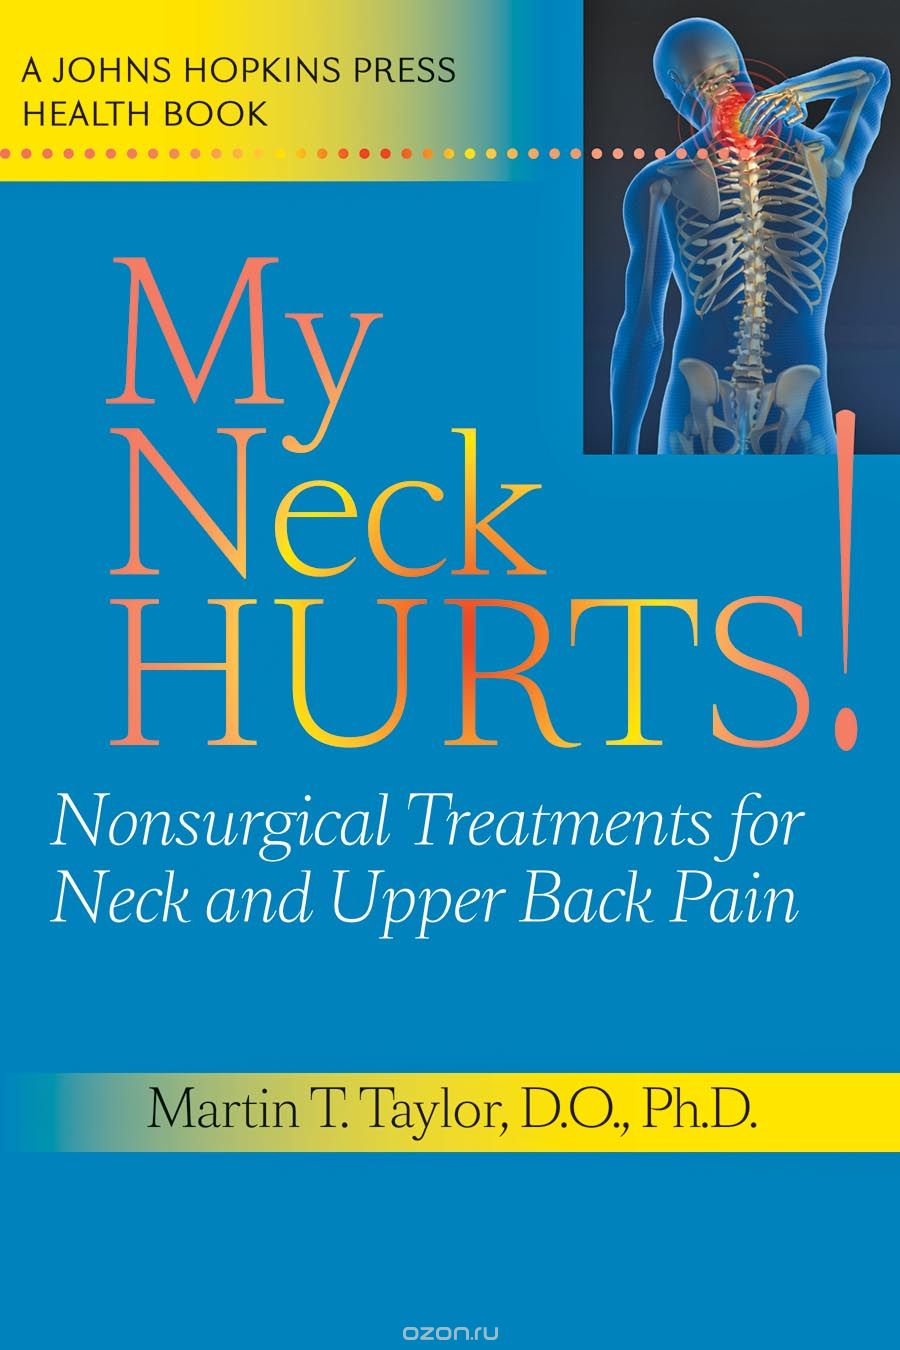 My Neck Hurts! – Nonsurgical Treatments for Neck and Upper Back Pain